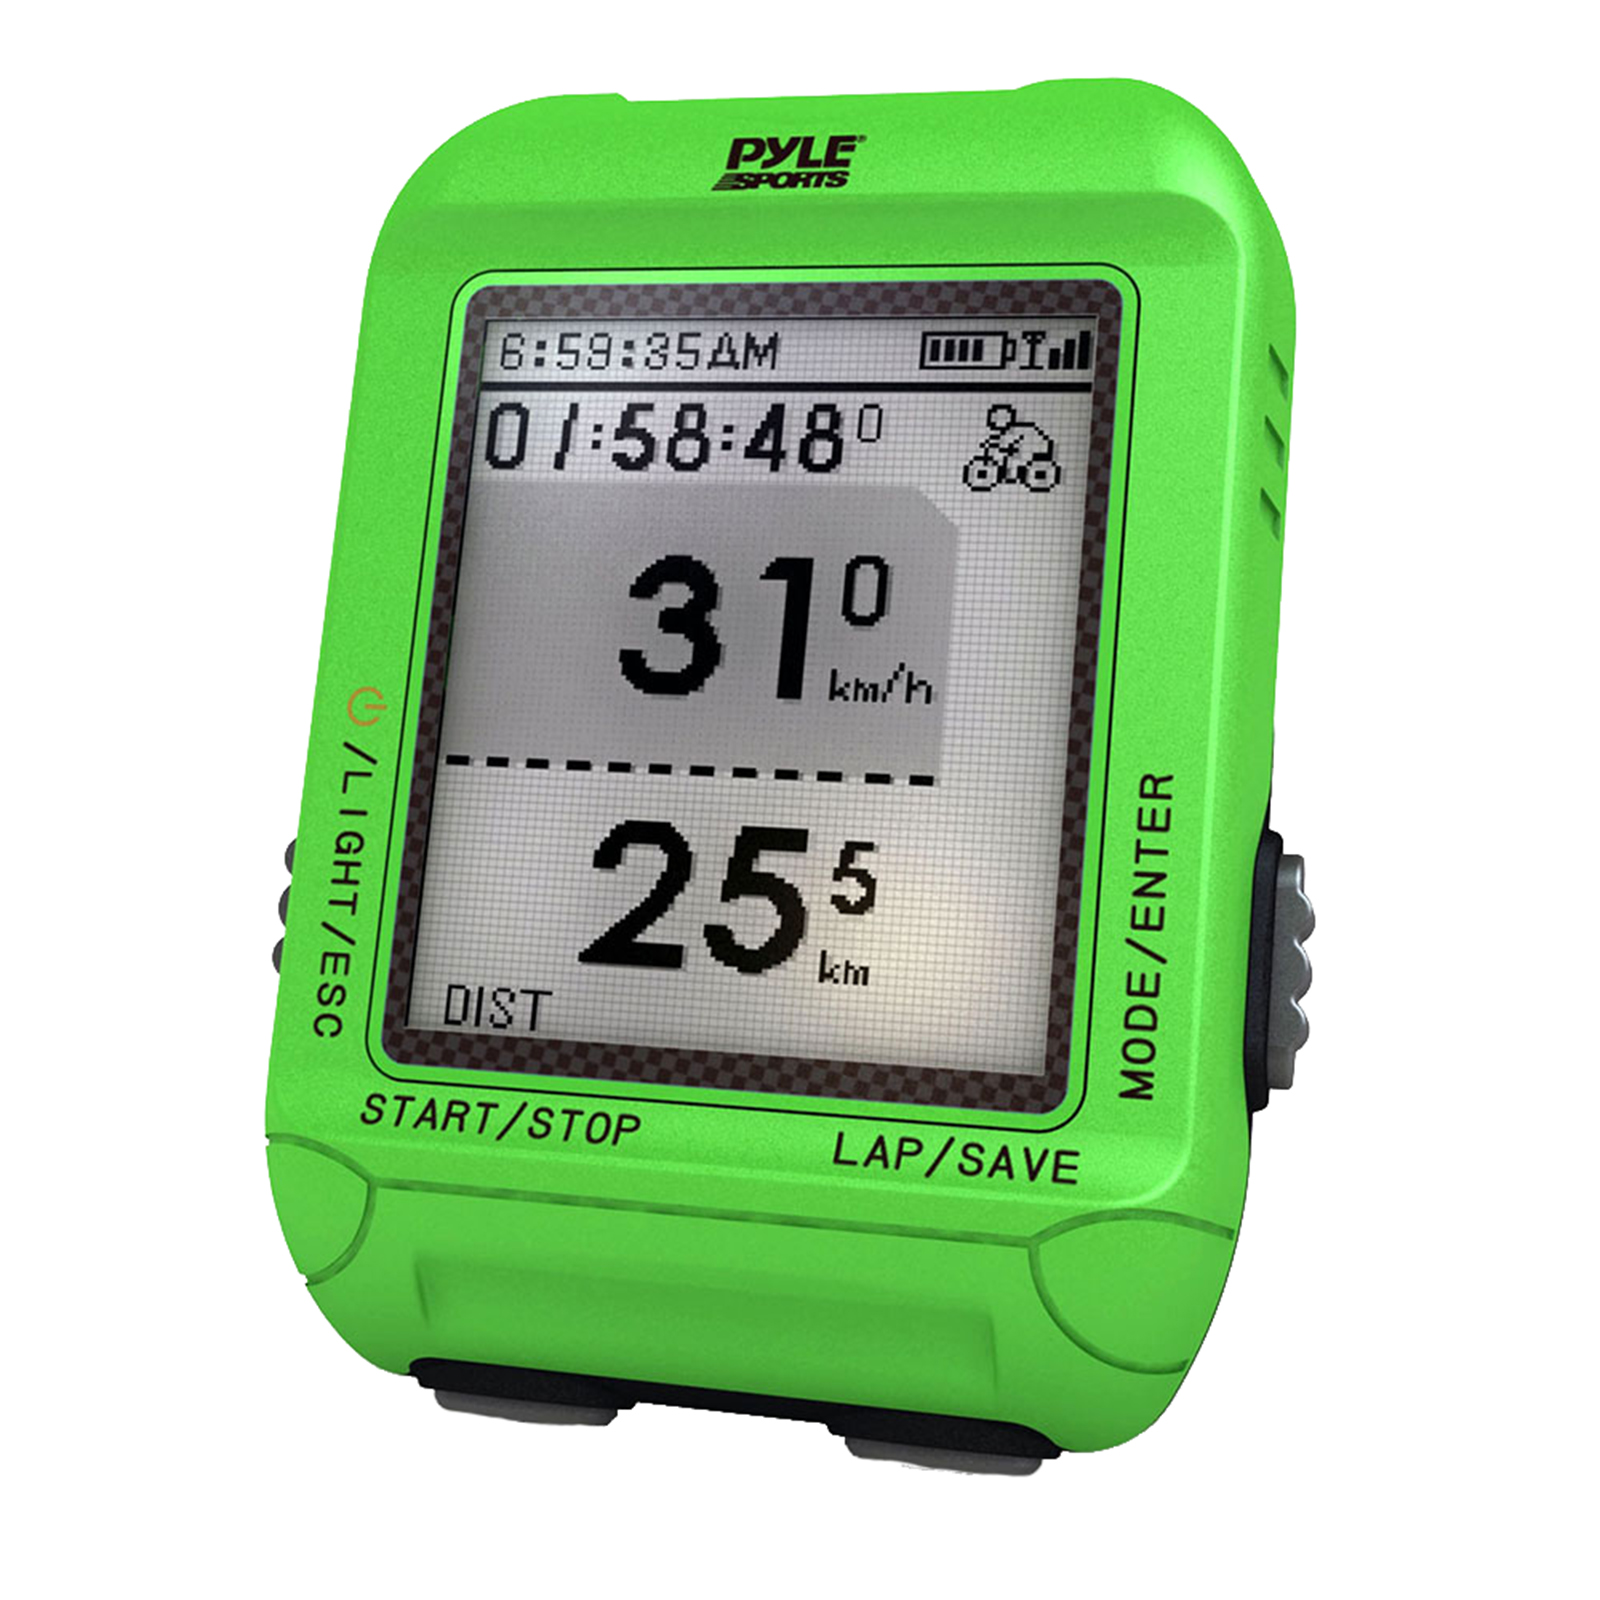 Smart Bicycling Computer with GPS Performance & Navigat Analysis Software and ANT+ Technology for Biking, Training, Exercise, Fitness (Green Color) - image 1 of 8